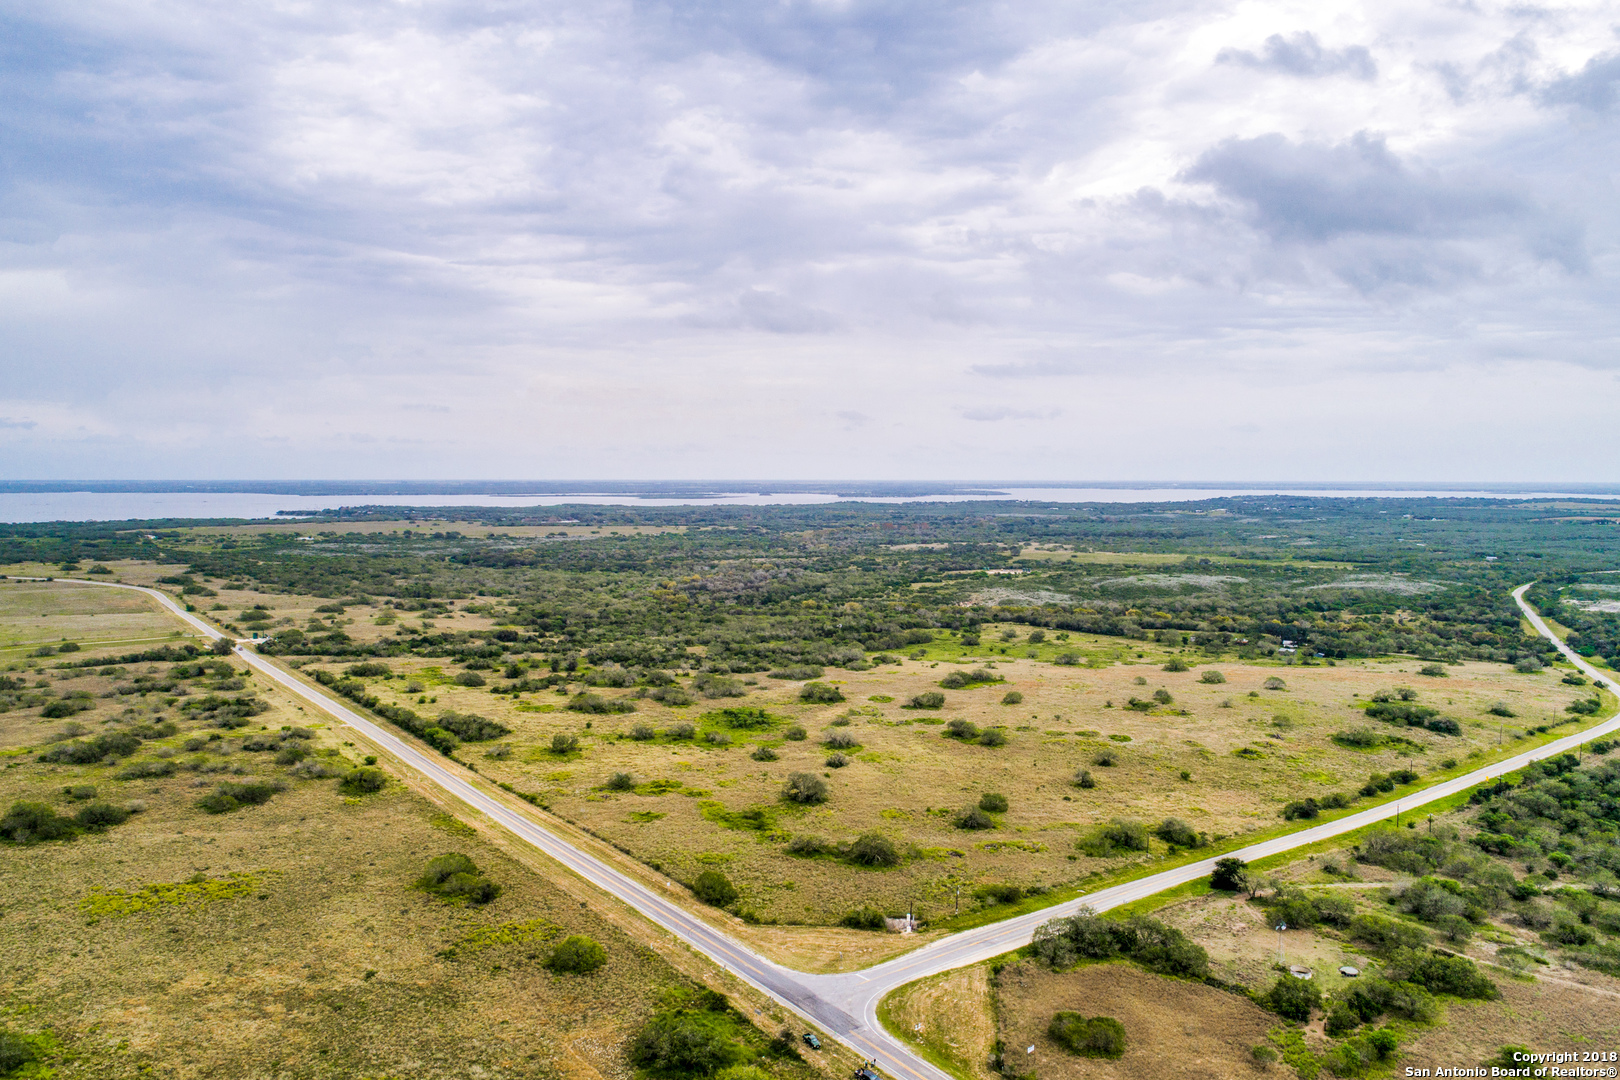 Developer's dream....Over 4200 ft on one side of property along FM 534 and 0ver 2800 ft of road frontage on 2nd side of property on Farm to market road FM 534.  La Garto creek on one part of property for fantastic hunting and recreation.  Hill top views, Mathis lake (Lake Corpus Christi) with a mile of the property.  Ag valuation in place, fantastic home with ample room, large barns, implement sheds and outbuildings.  No restrictions.  Multi use potential.